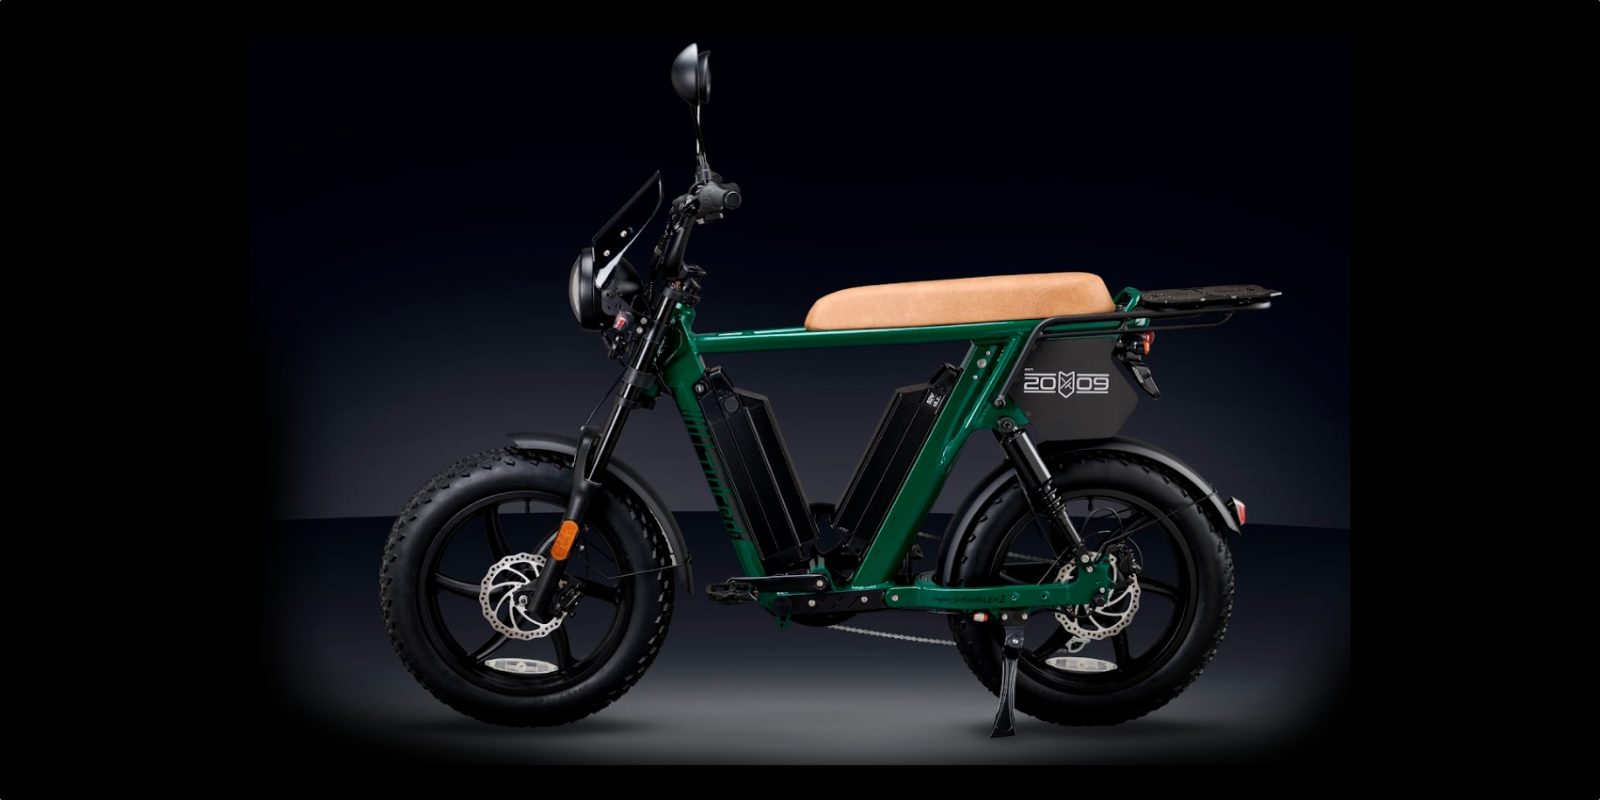 Juiced drops prices on its highest-power electric bikes amid battle